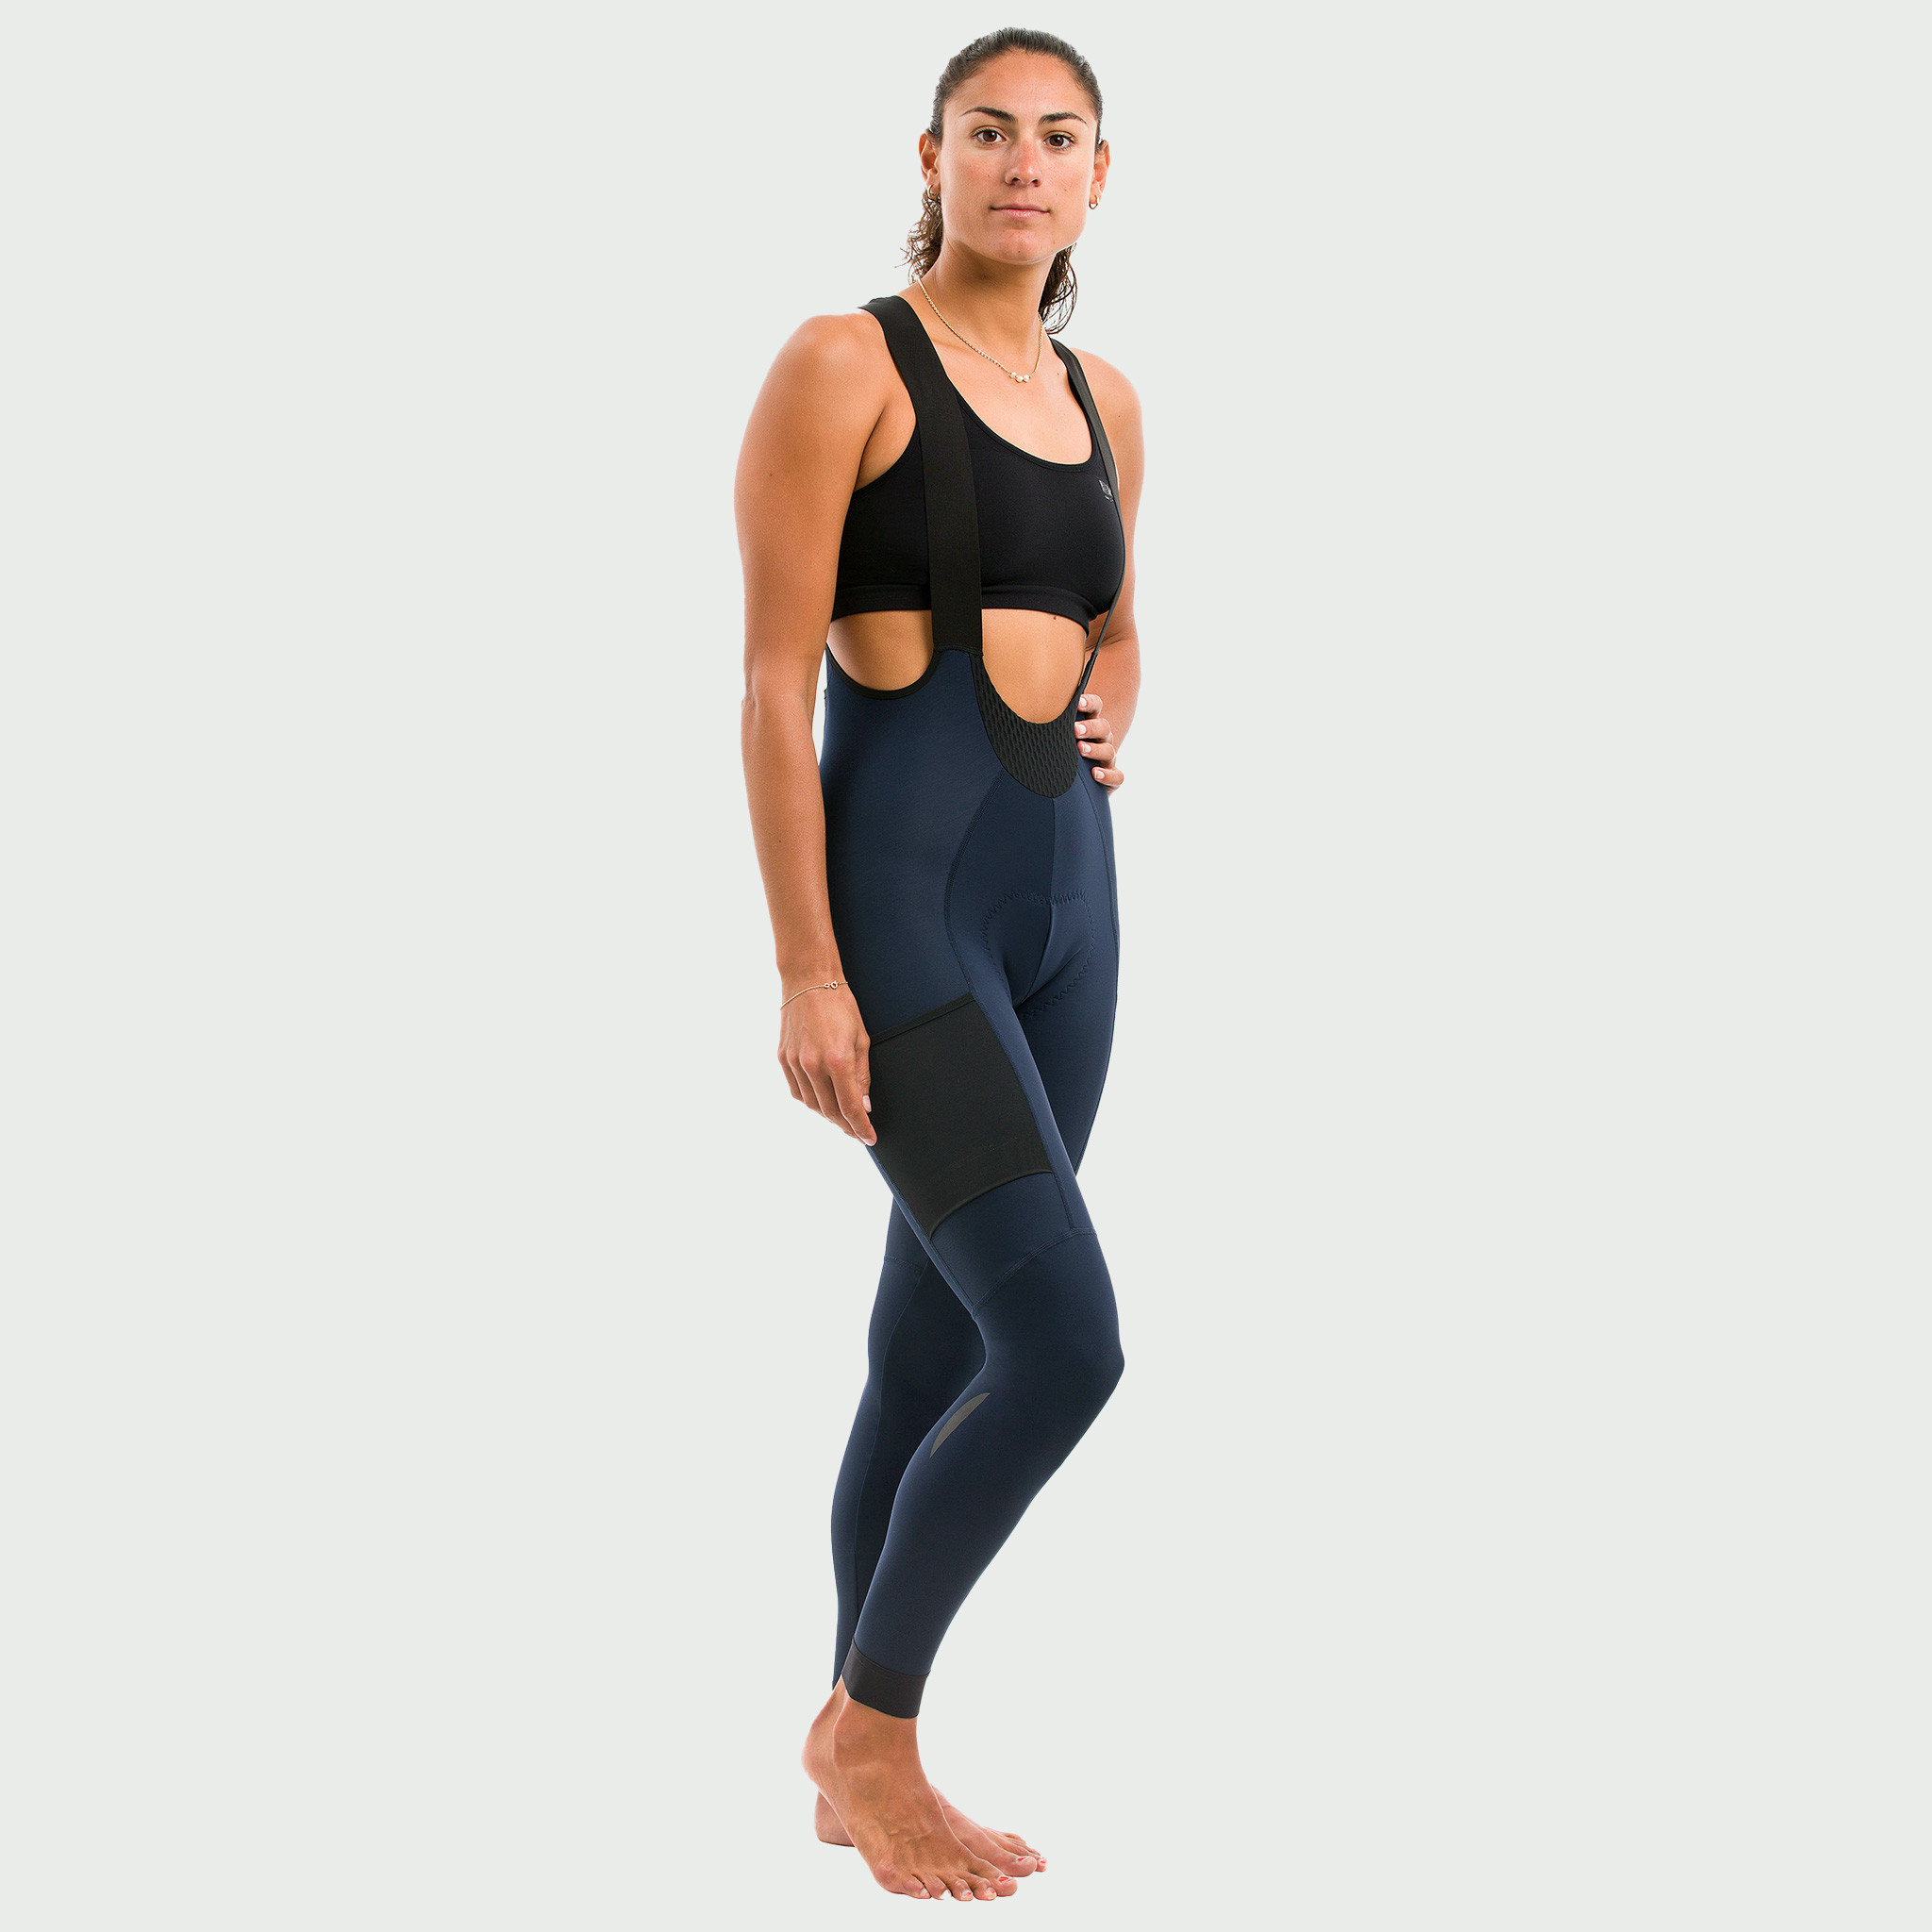 Santini SFIDA Women's Winter Thermal Tights - black - Cycling and Sports  Clothing - Bicycle Clothing Specialists